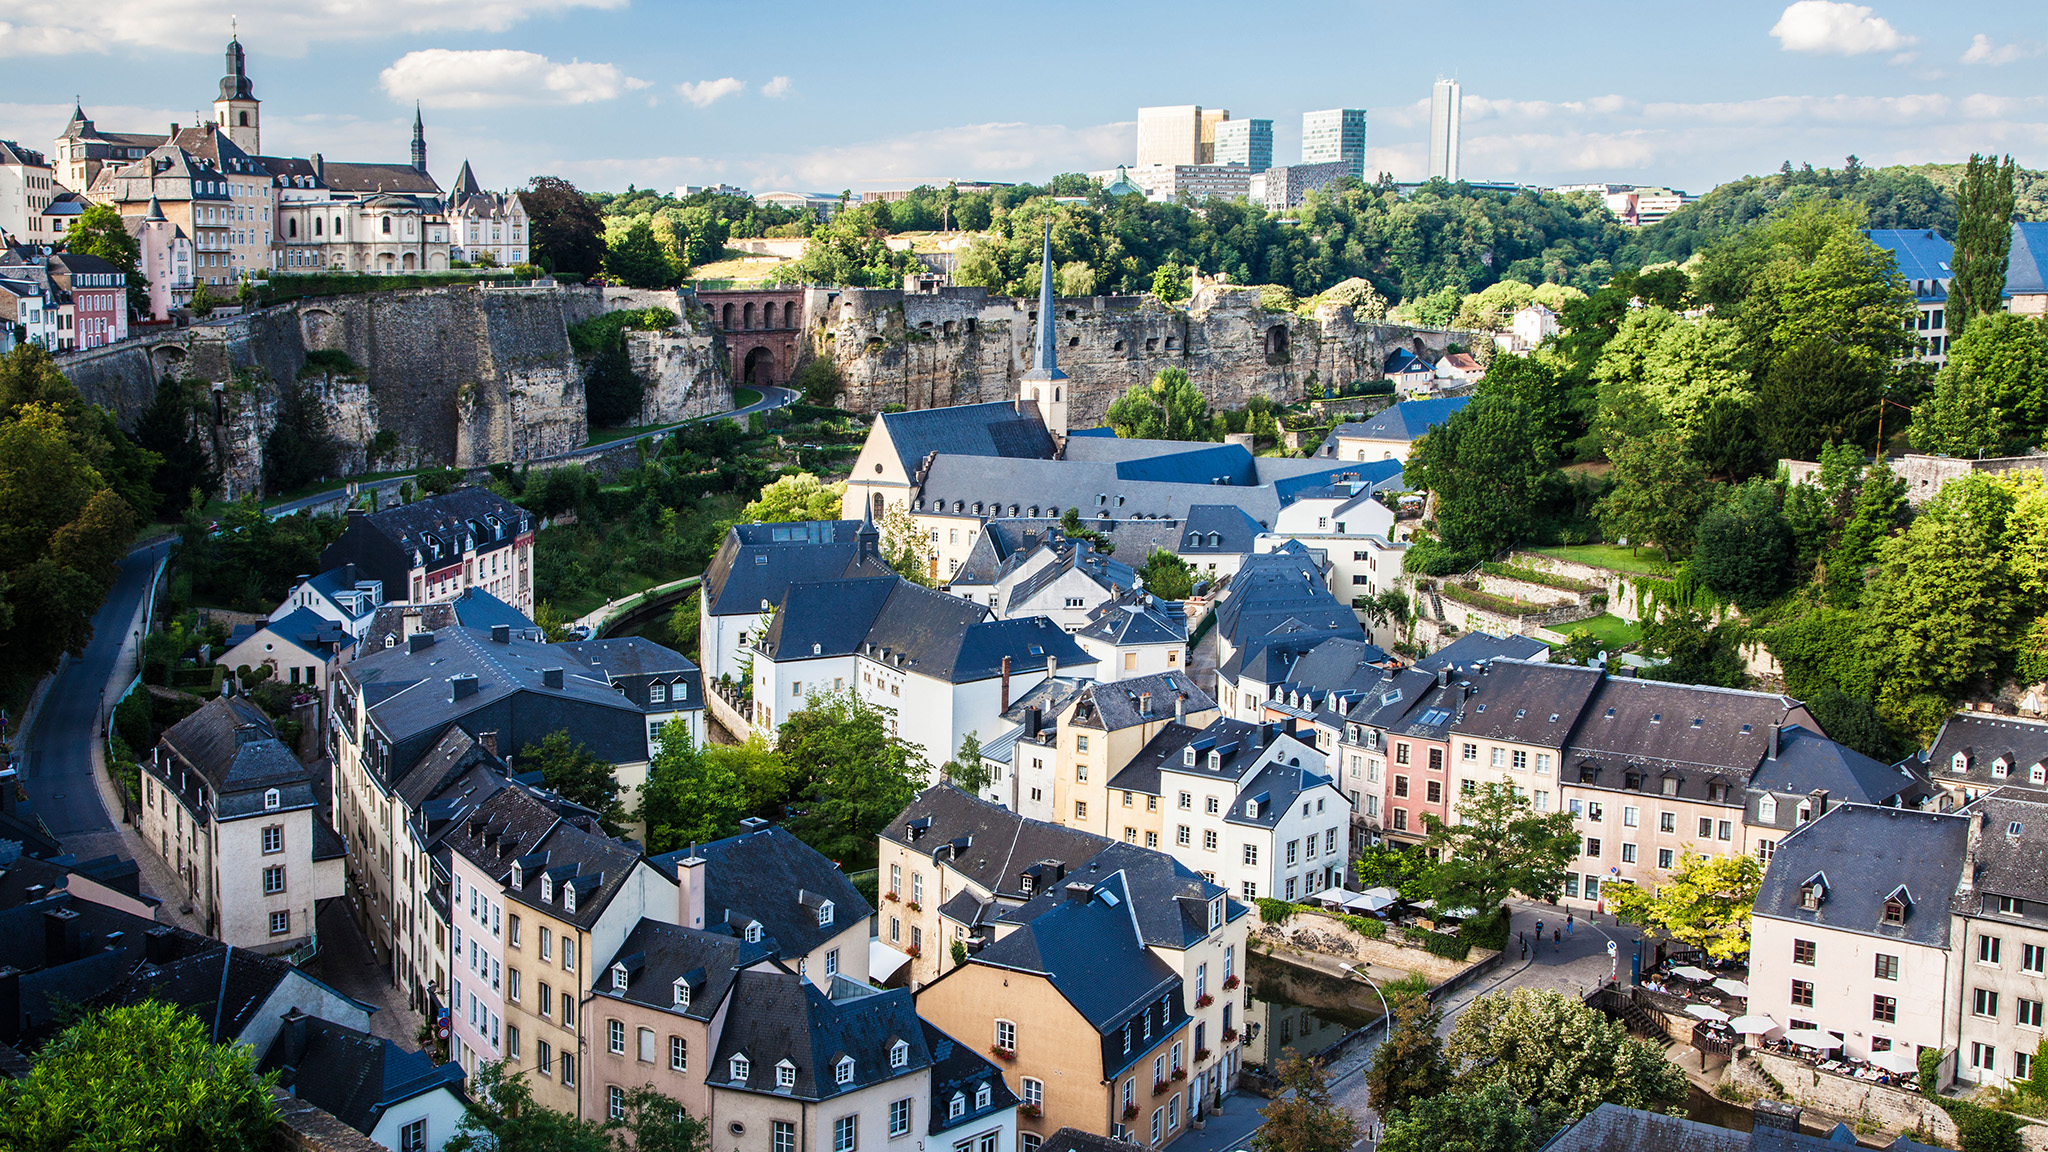 Luxembourg Residential Property Market Overvalued by 61%